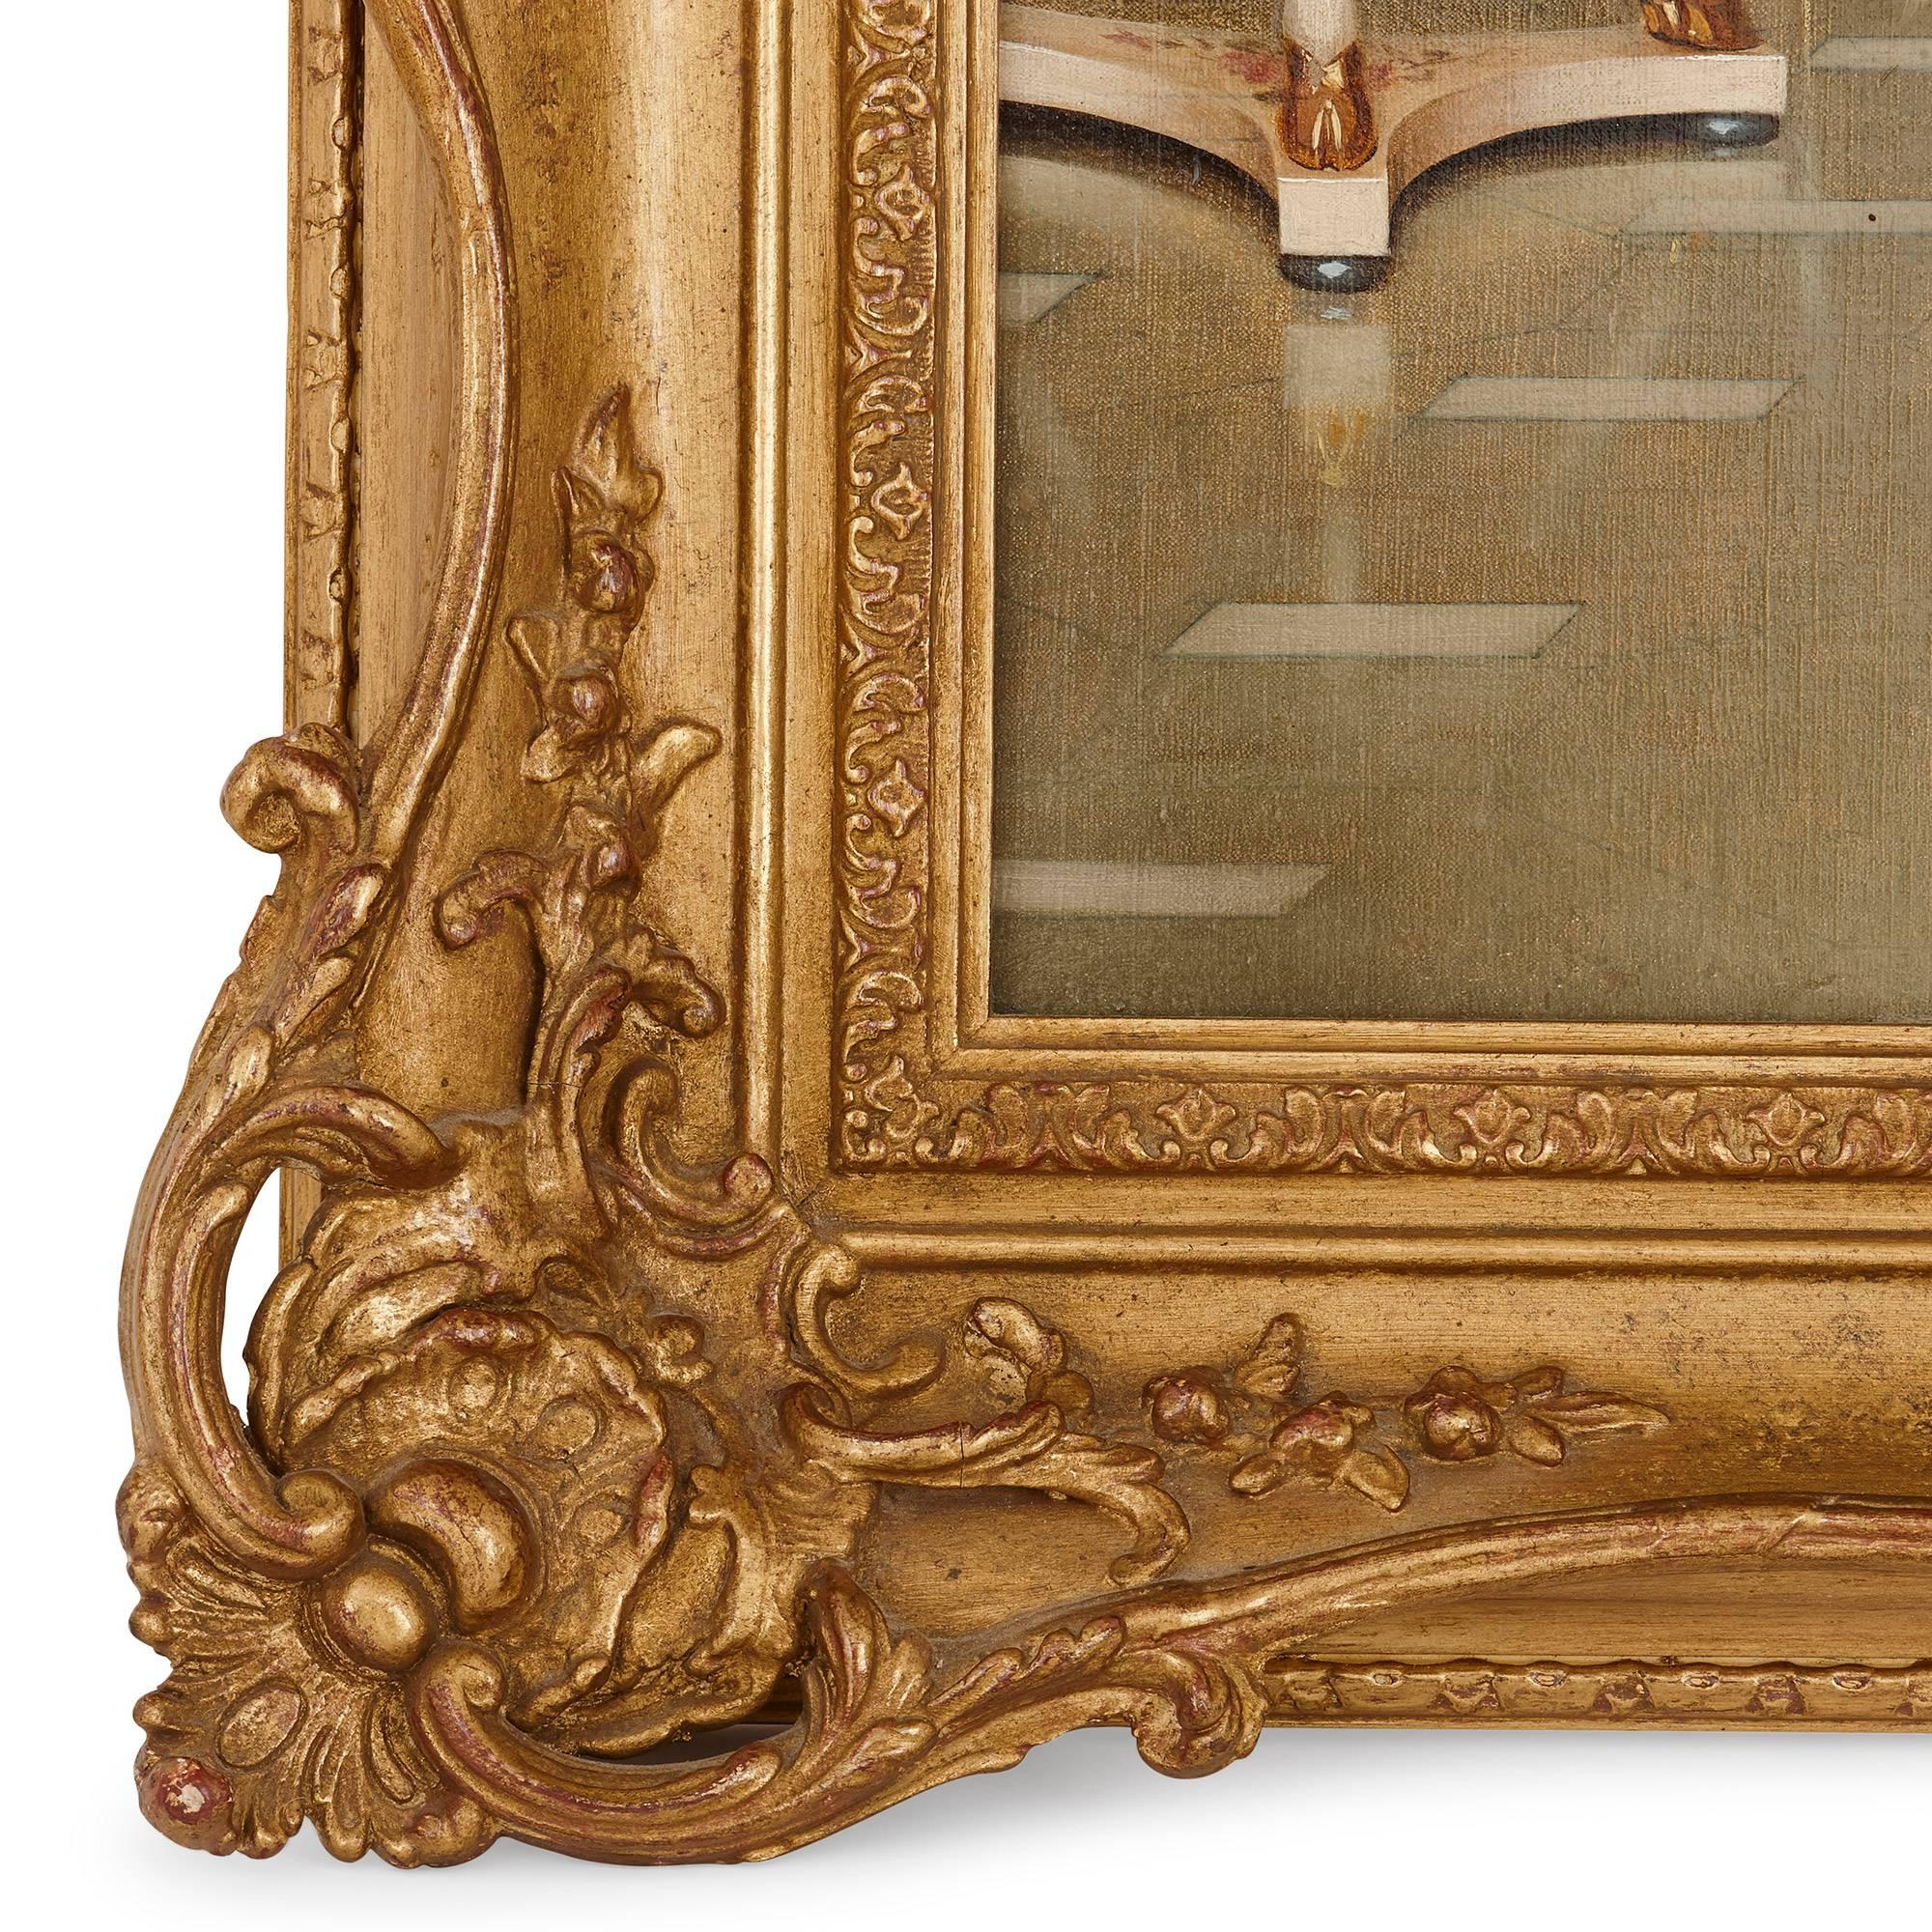 'A Shared Confidence', 19th Century oil painting in a carved giltwood frame - Academic Painting by Frédéric Soulacroix